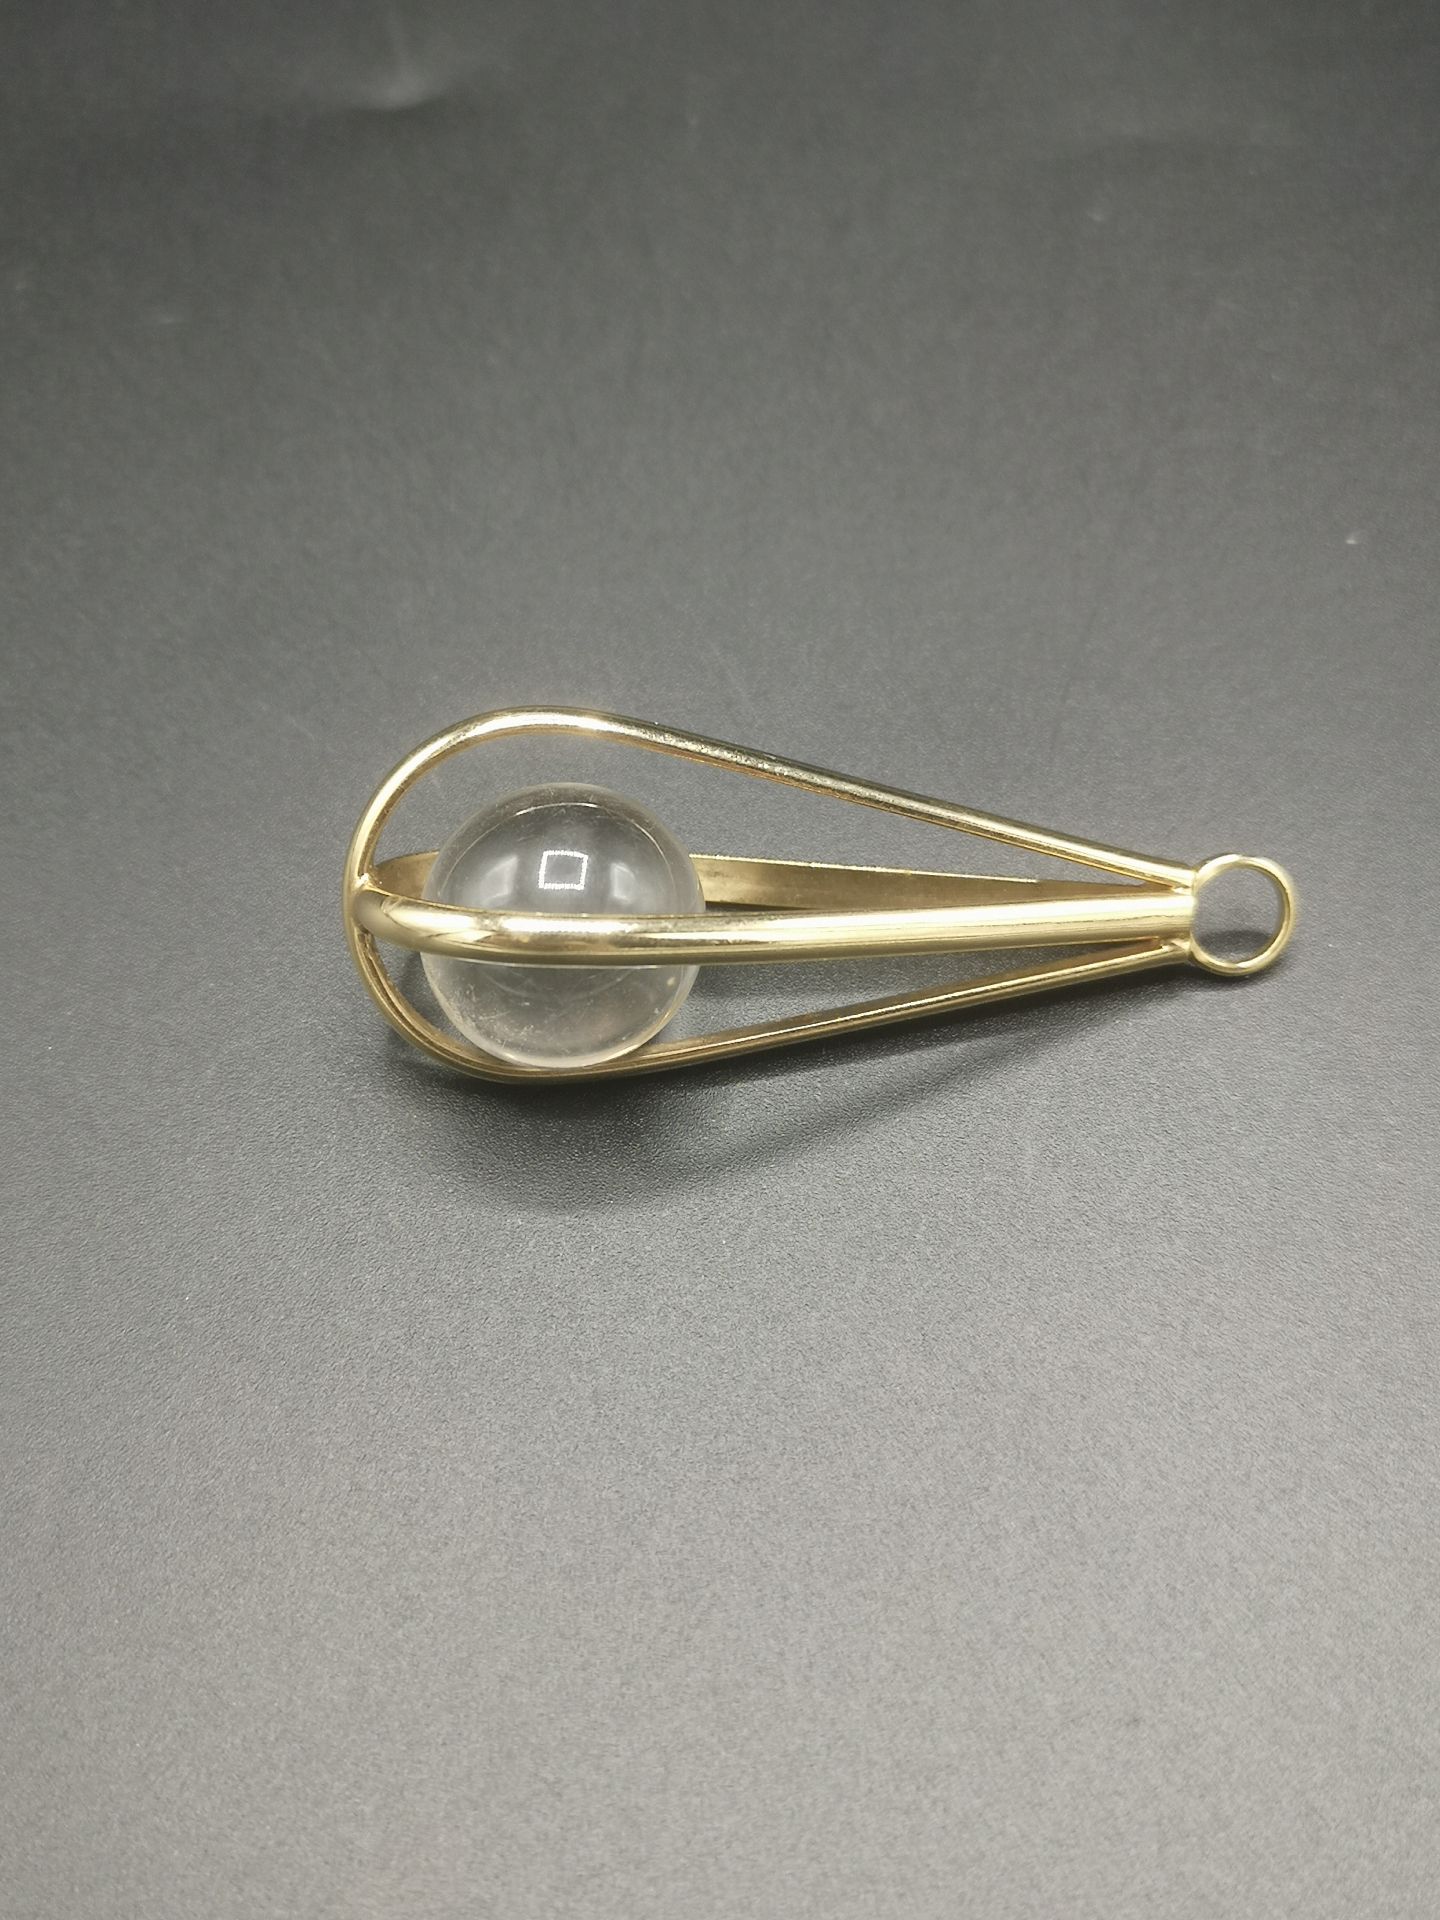 9ct gold pendant - Image 2 of 8